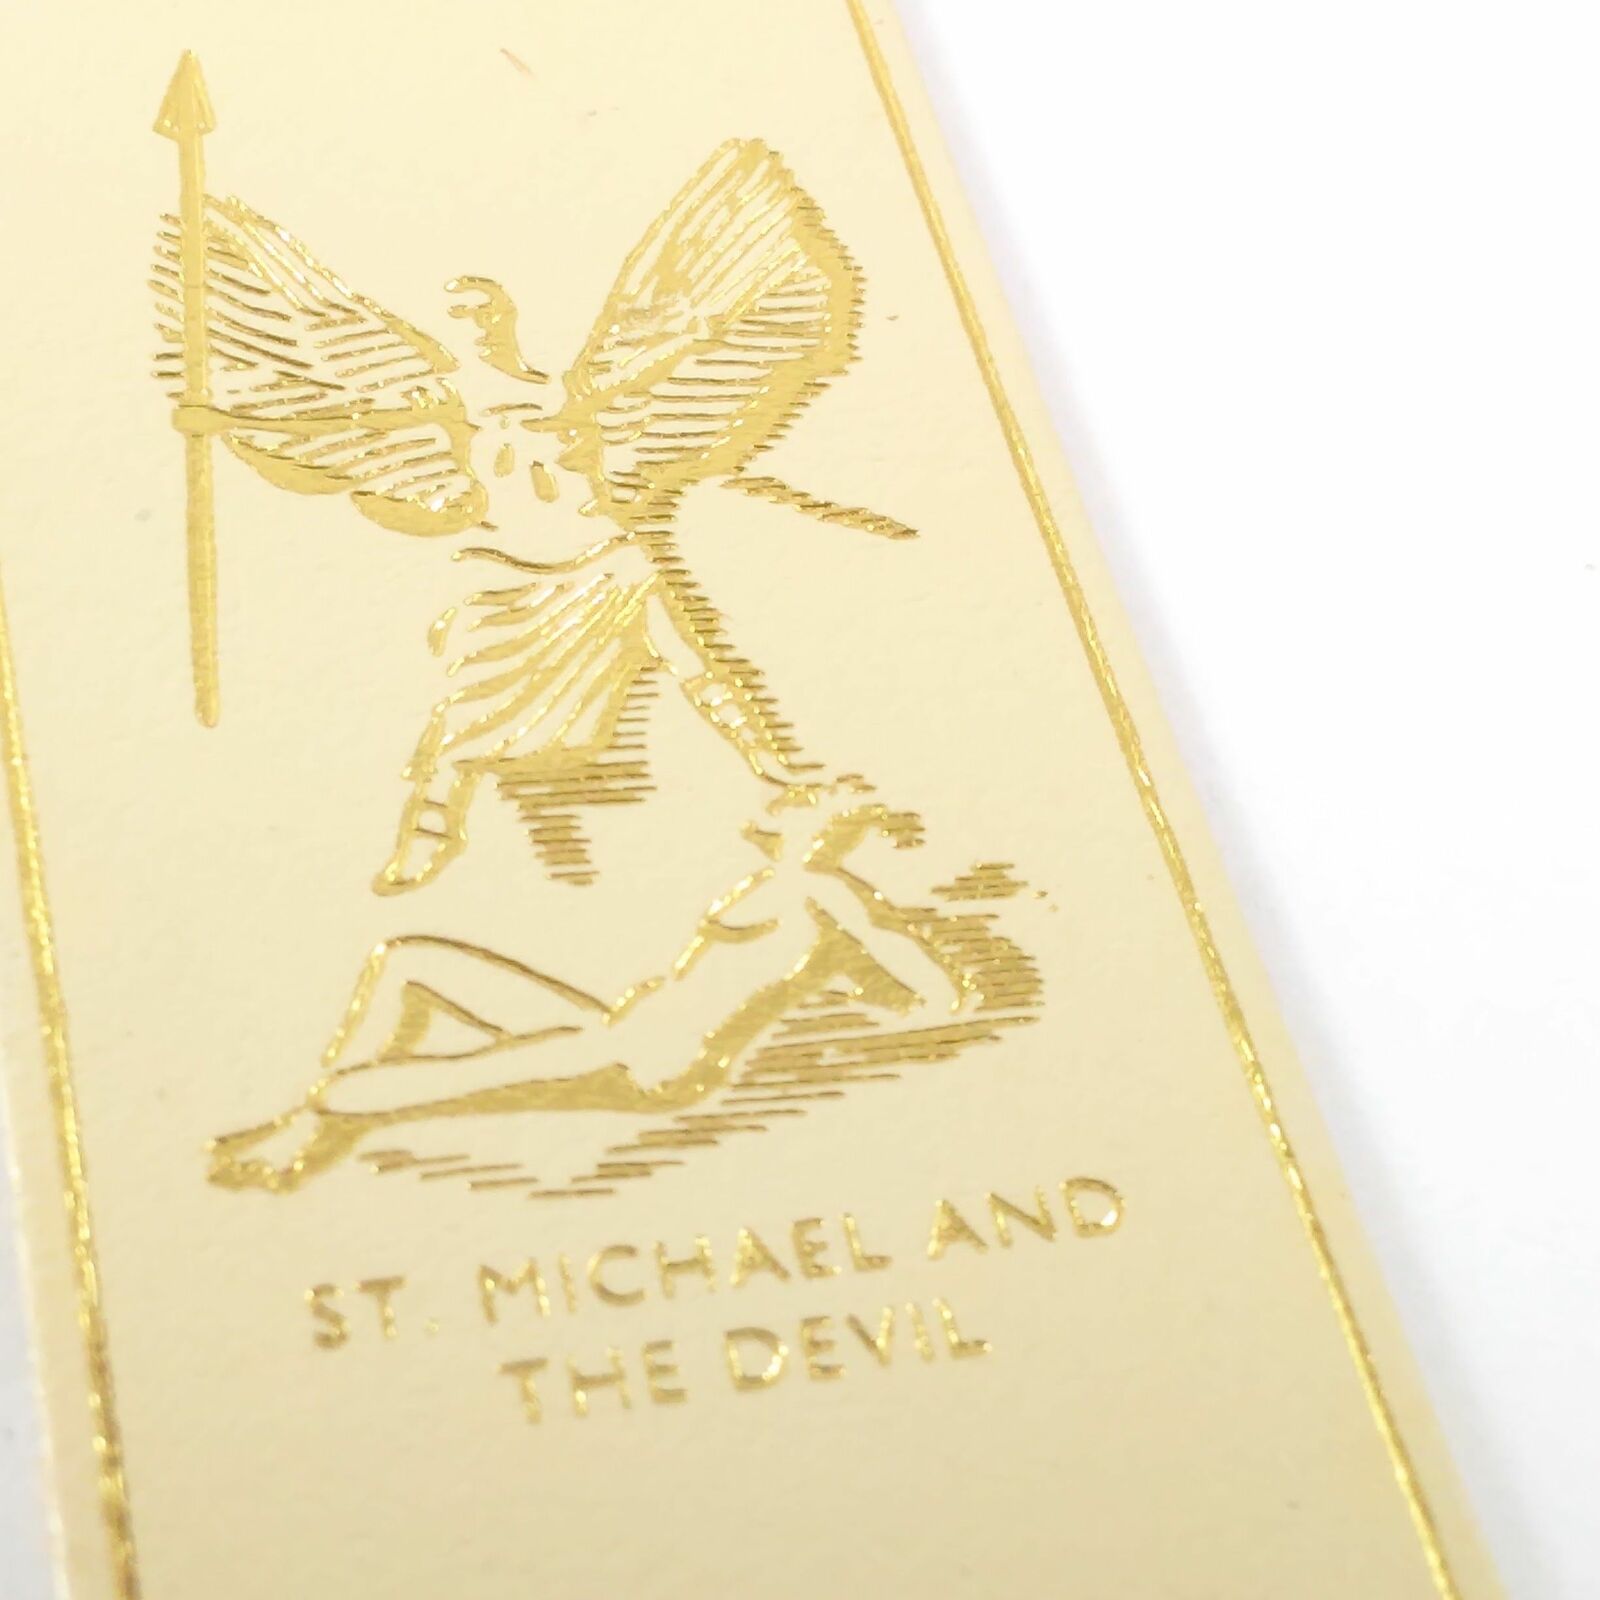 St Michael Cream The Devil Coventry Cathedral Prior To Destruction Bookmark